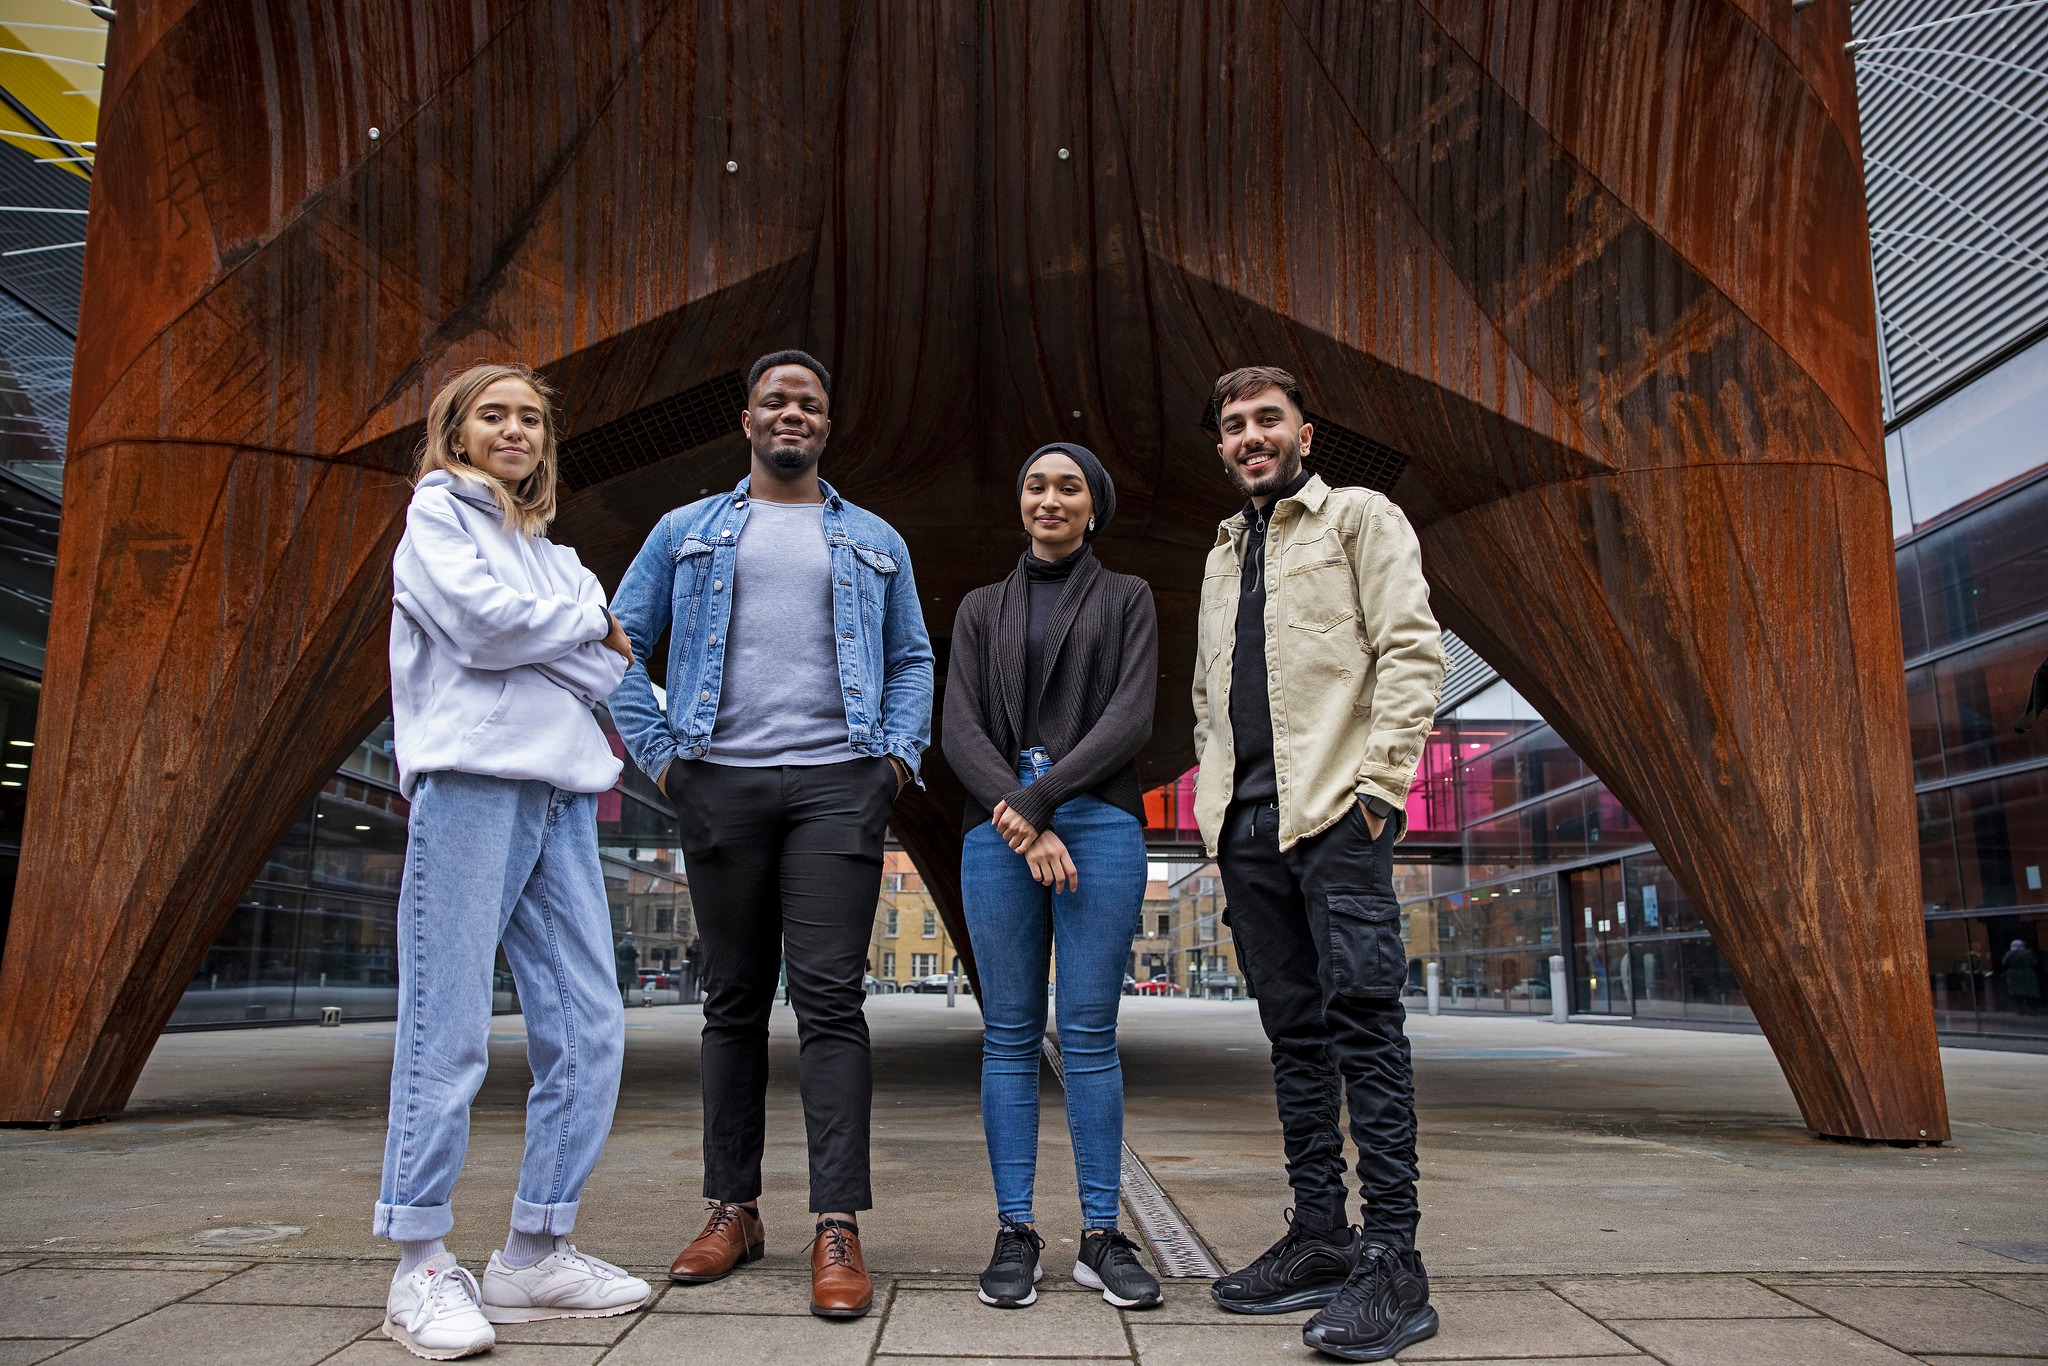 Our vision, aligned with the QMUL 2030 strategy, is to provide an enriching and rewarding experience for the student that enables them to put the academic knowledge into practice. 